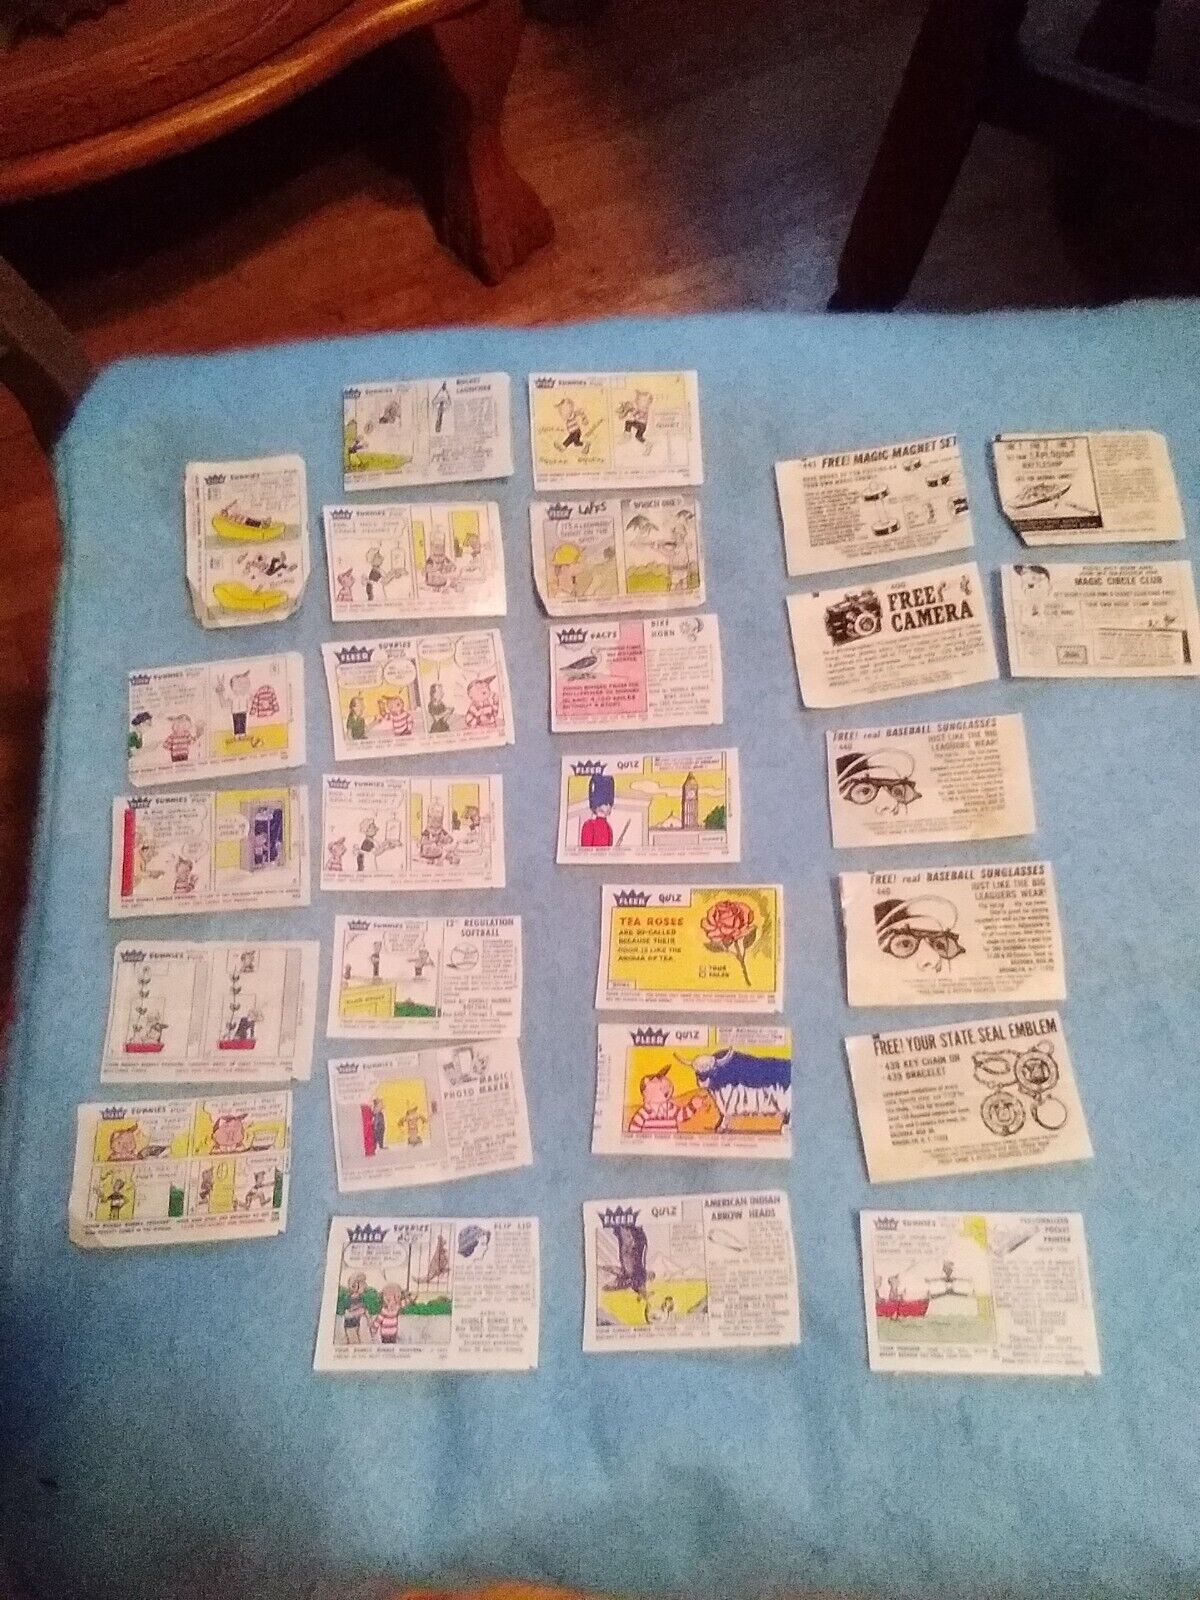 Fleer Funnies staring PUD Comic waxed Gum Wrappers,coupons, Laffs 27 comics